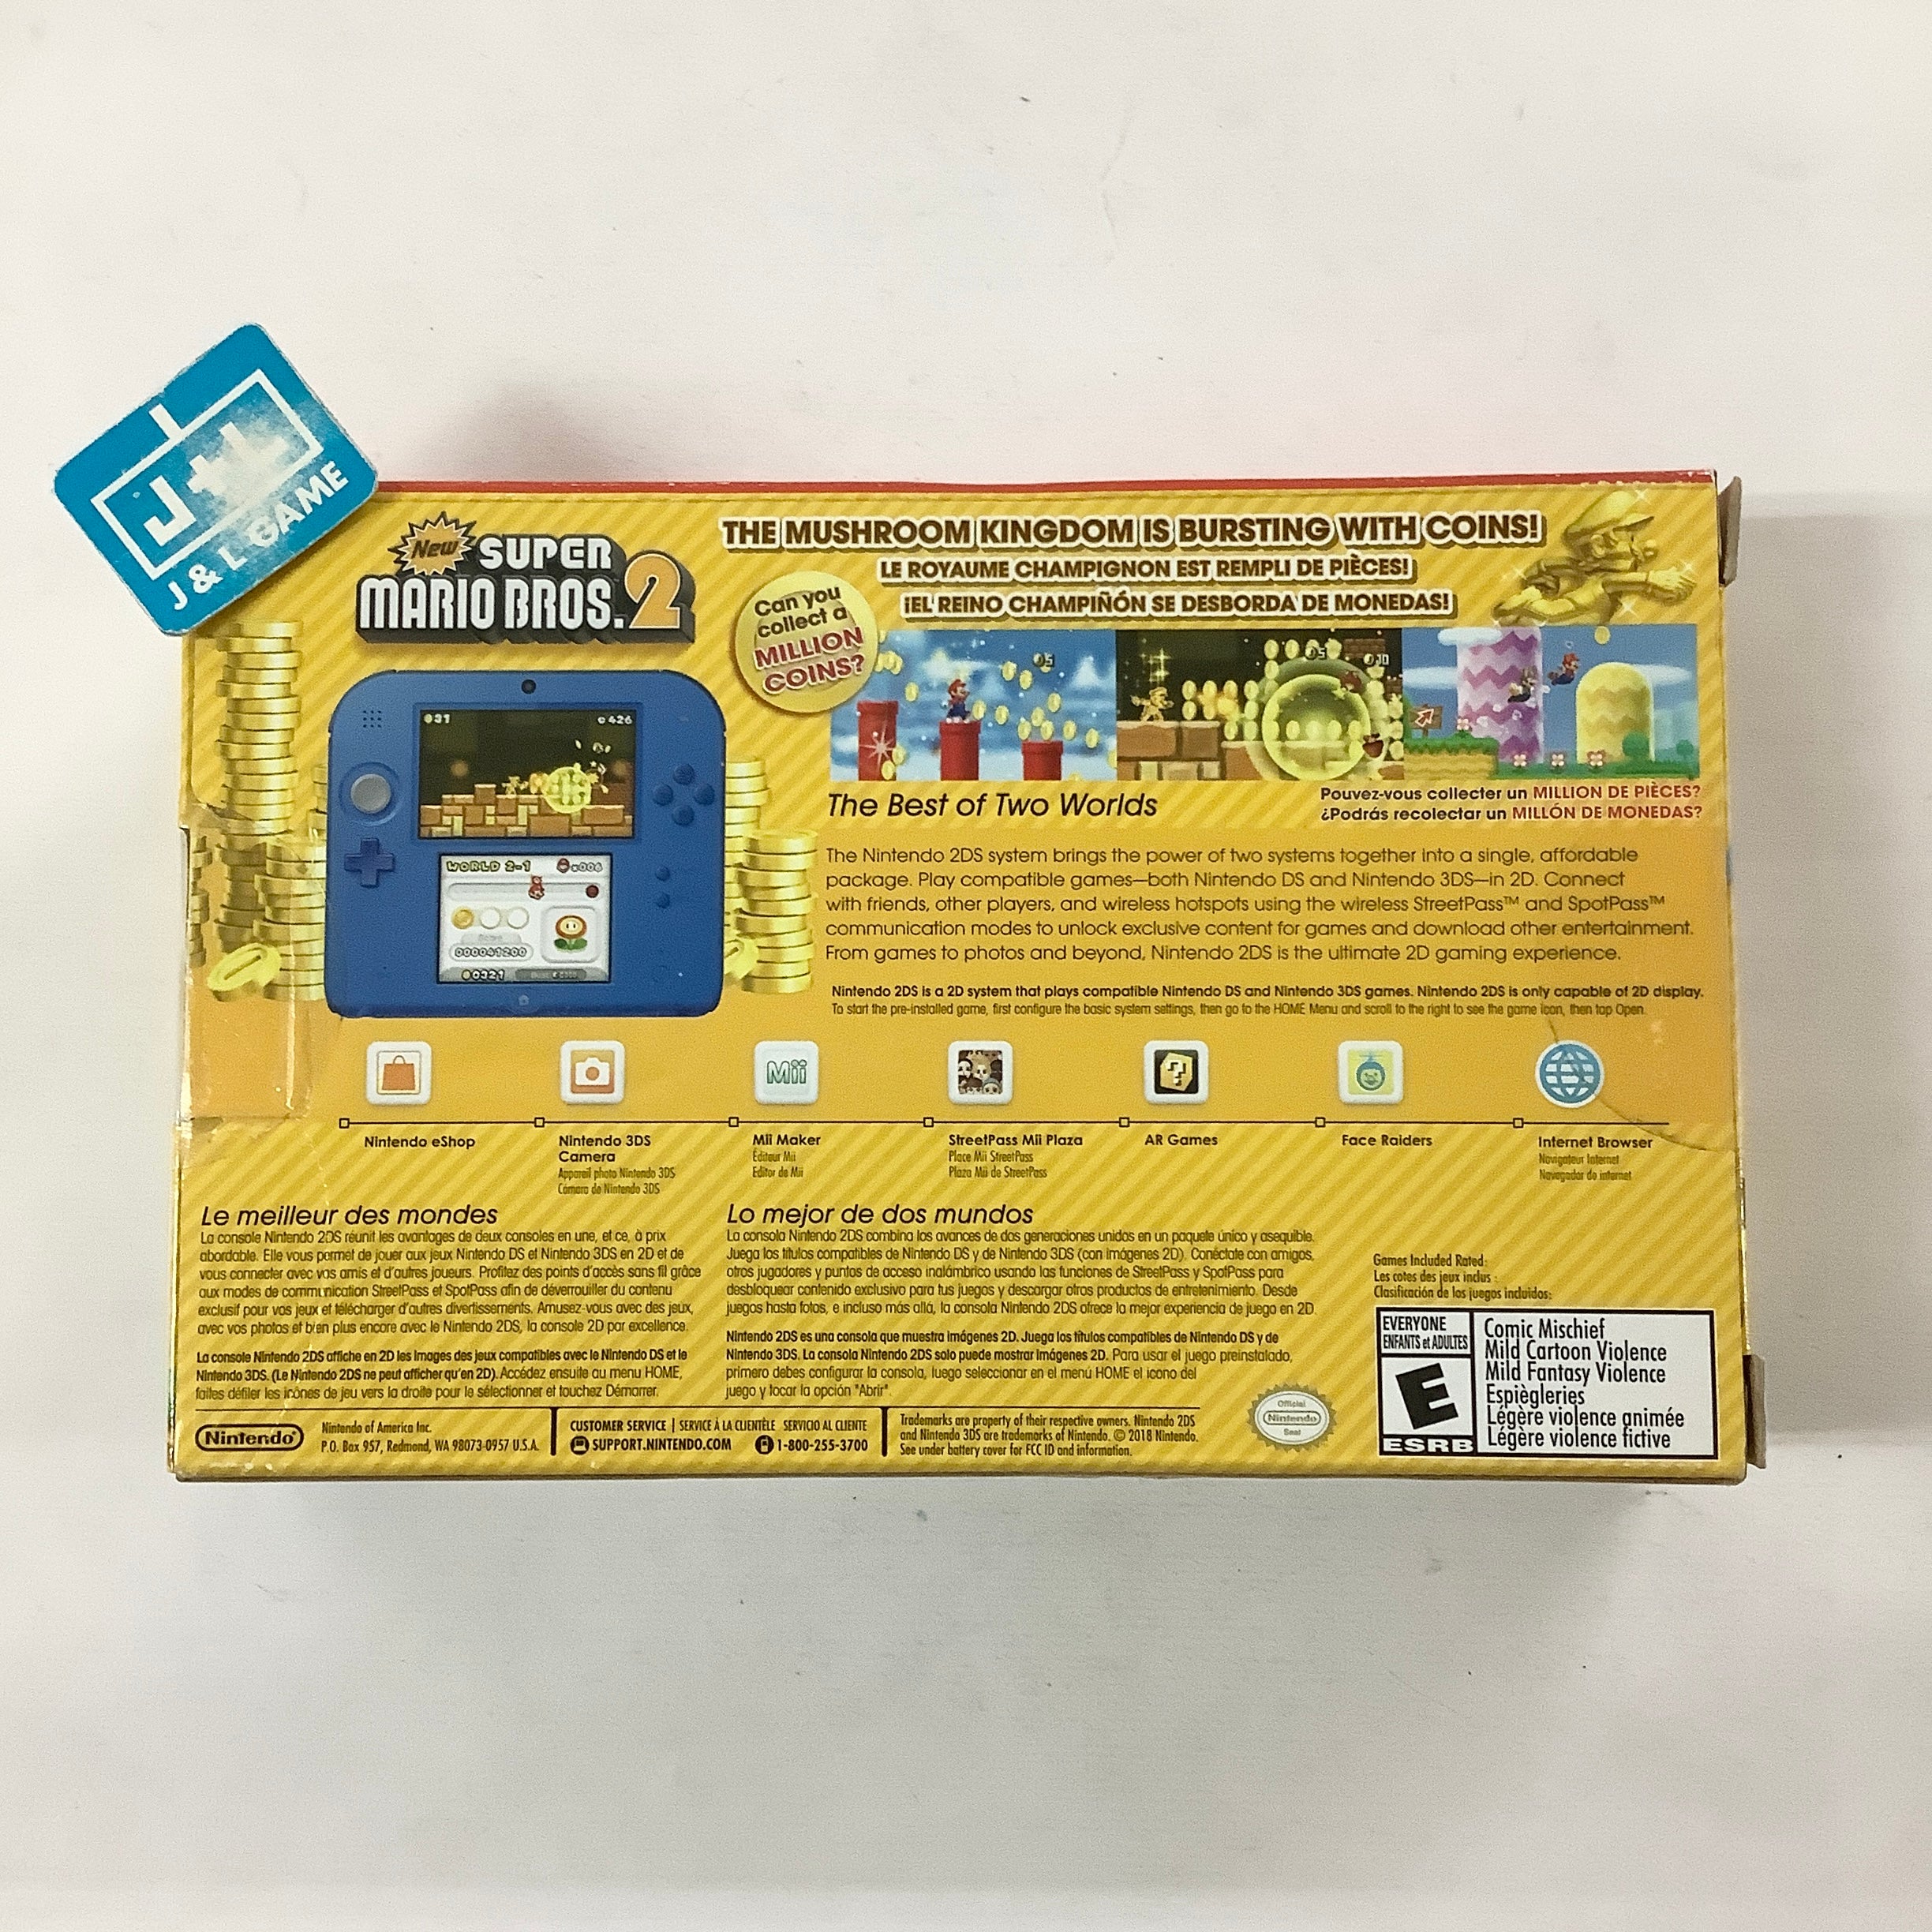 Nintendo 2DS Console  - (Electric Blue) 2 with New Super Mario Bros. 2 (Game Pre-Installed) - Nintendo 3DS Consoles Nintendo   